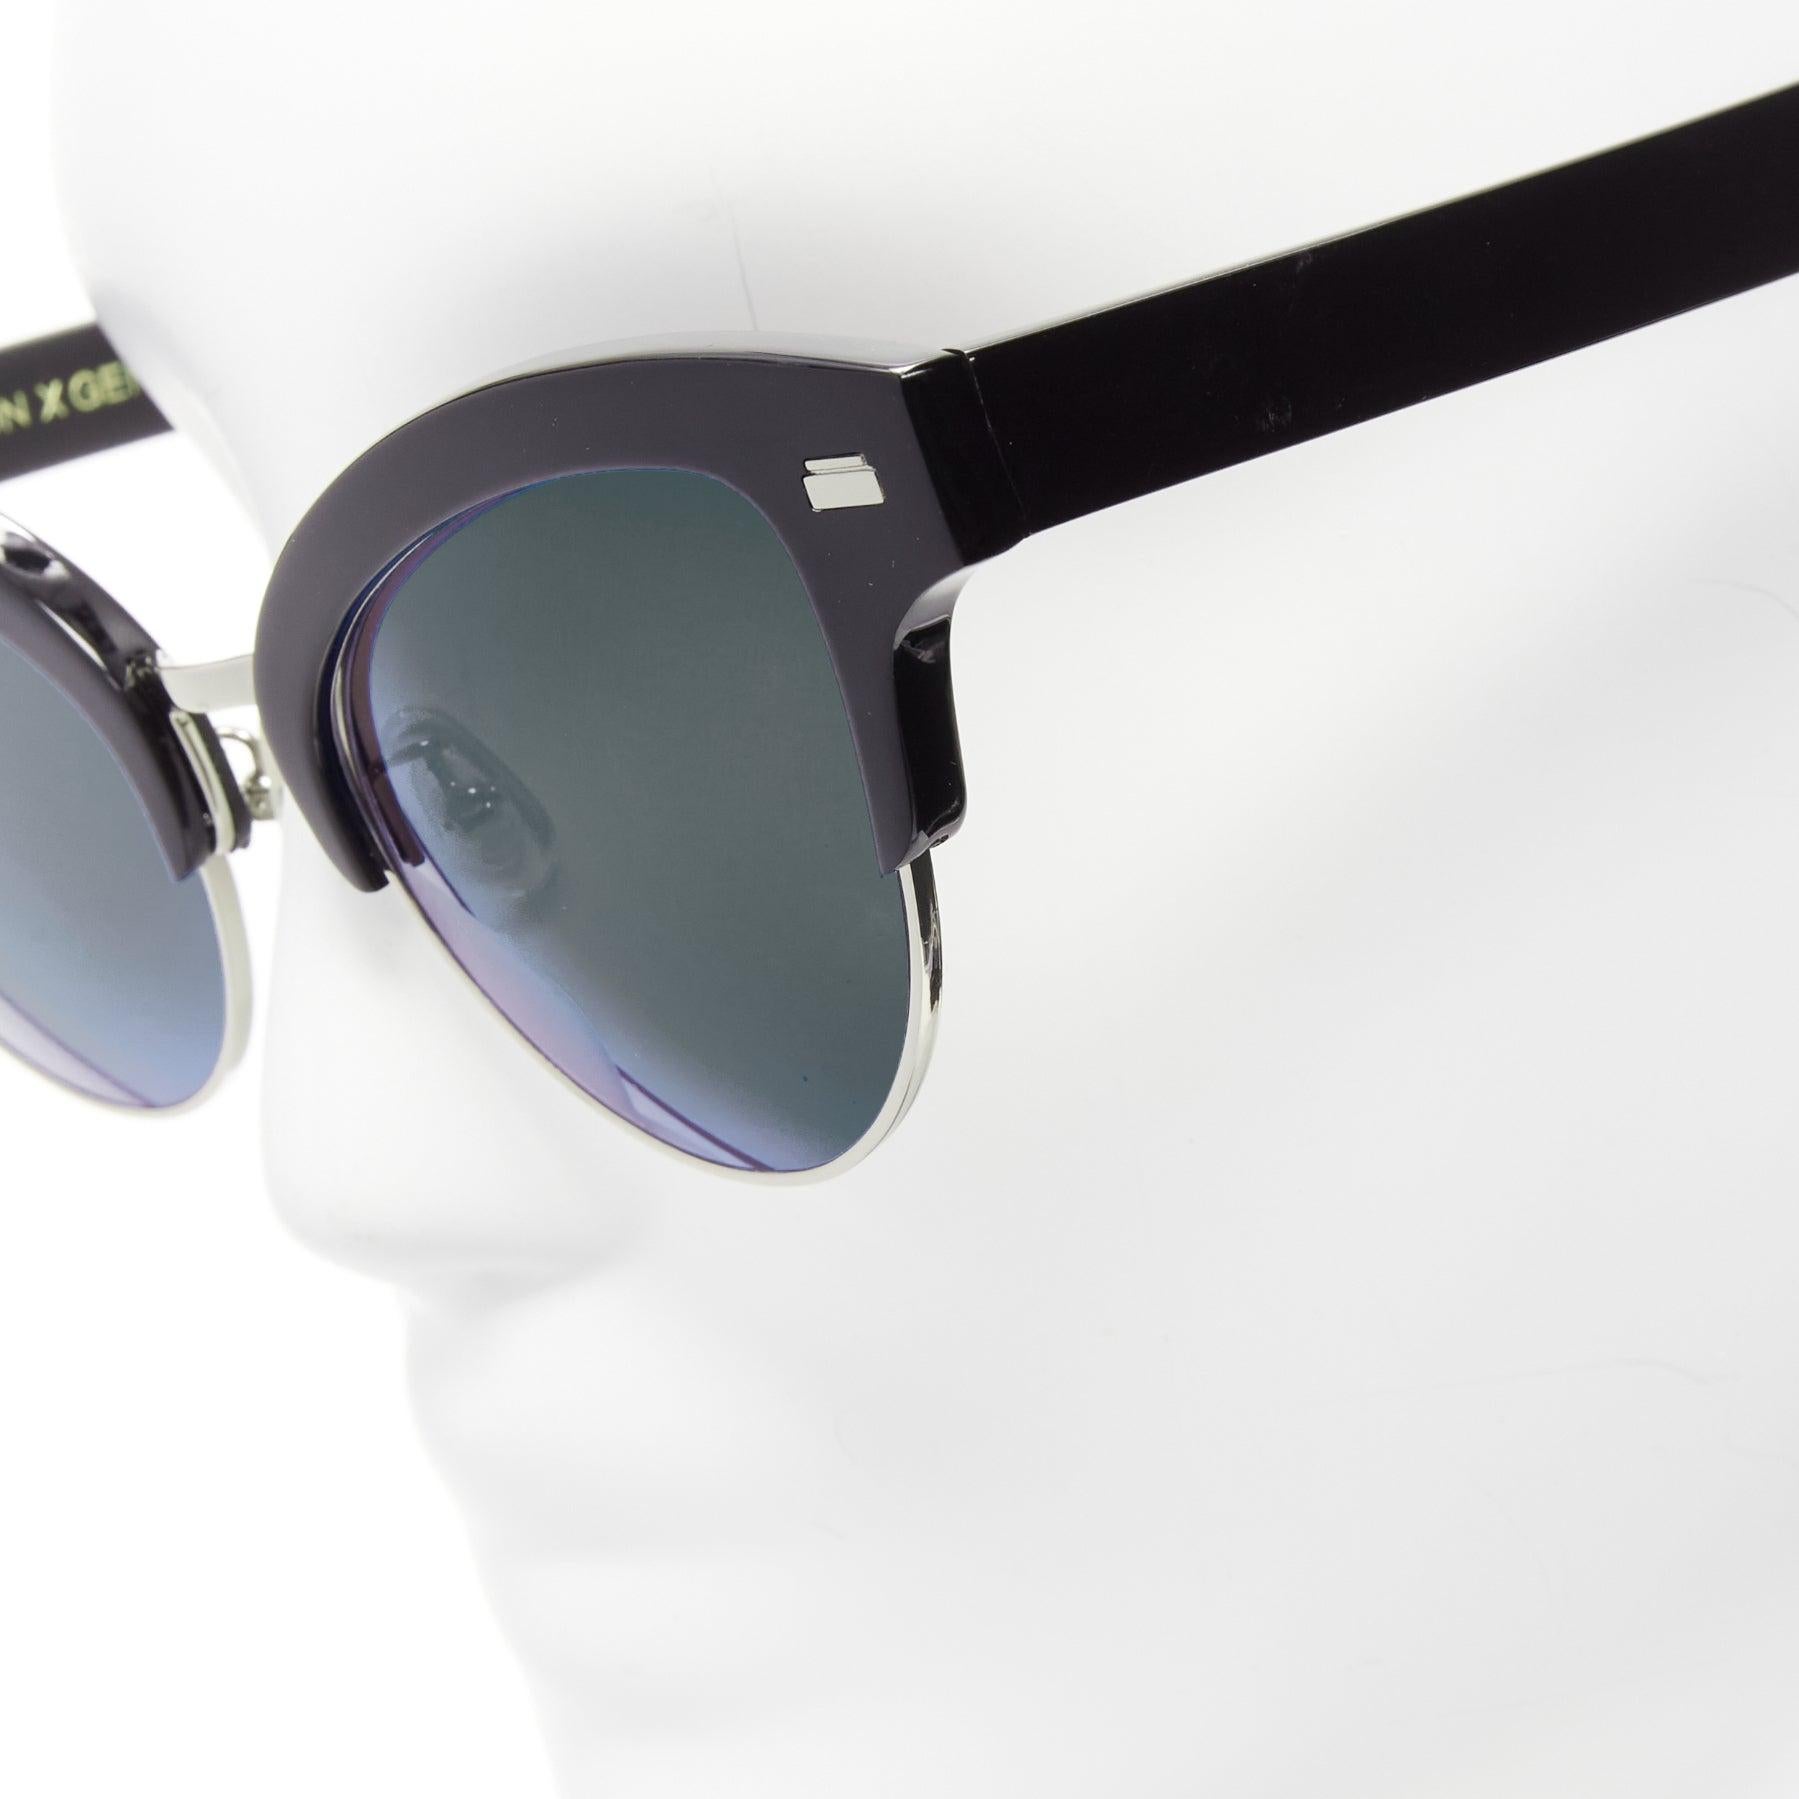 GENTLE MONSTER Pushbutton No.2 Inflexible J01 black cat eye sunglasses
Reference: BSHW/A00105
Brand: Gentle Monster
Model: No.2 Inflexible J01
Collection: Pushbutton
Material: Acrylic
Color: Black, Green
Pattern: Solid
Lining: Black Acrylic
Extra